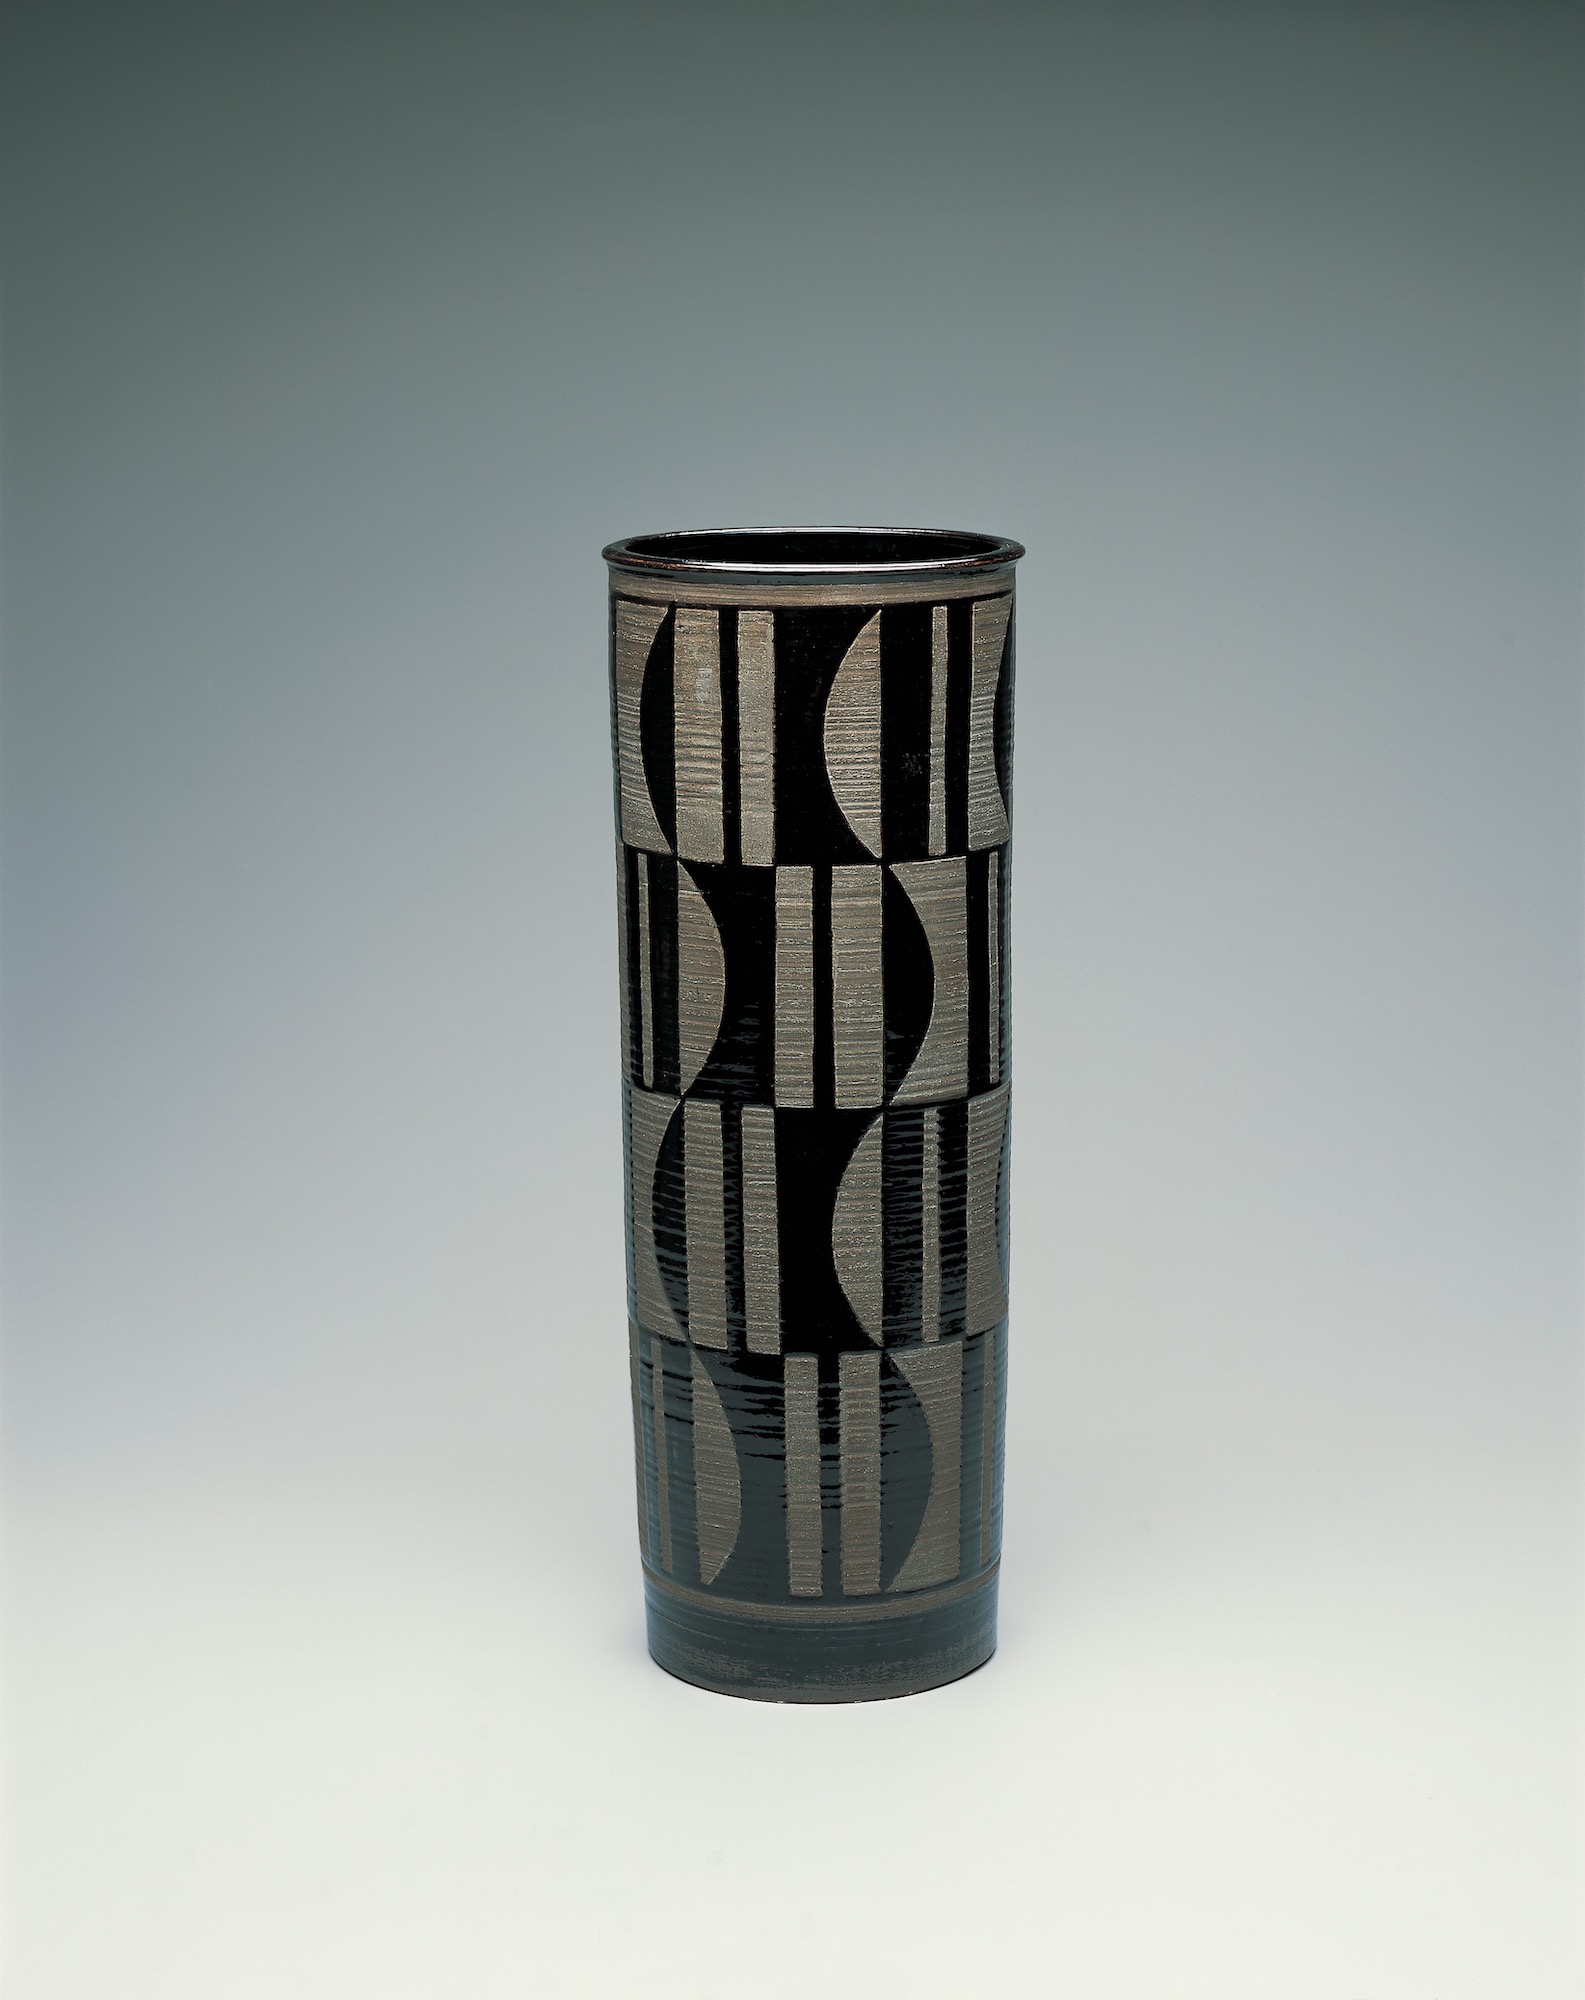 Maija Grotell, vase circa 1940-1942 from Cranbrook Museum of Art collection 